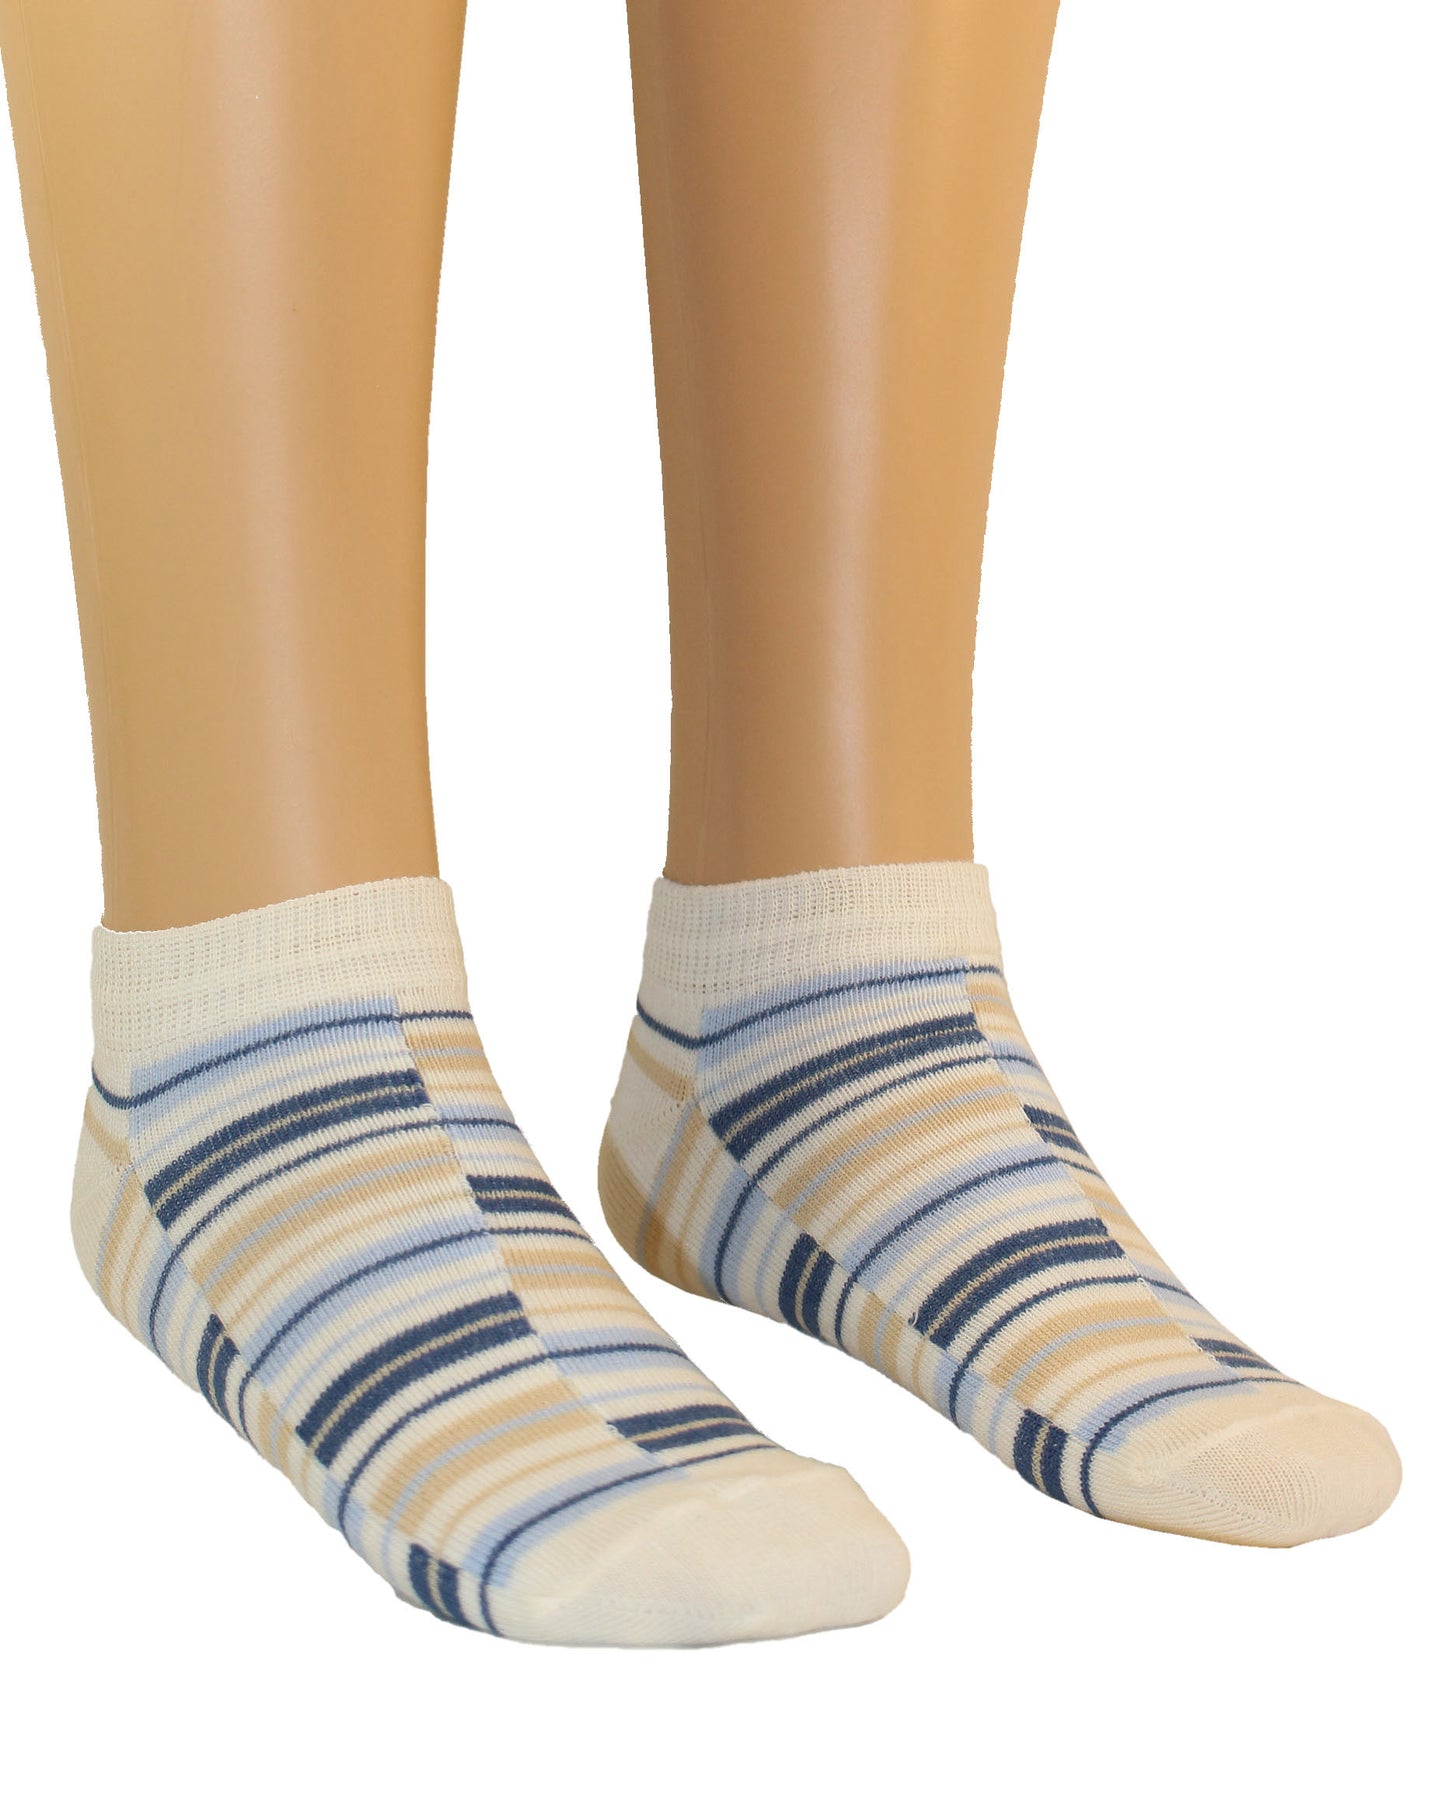 Omsa Serenella Harry Calzino - Kid's low ankle cotton sneaker ankle socks with a linear stripe pattern in cream, light blue, navy and beige.